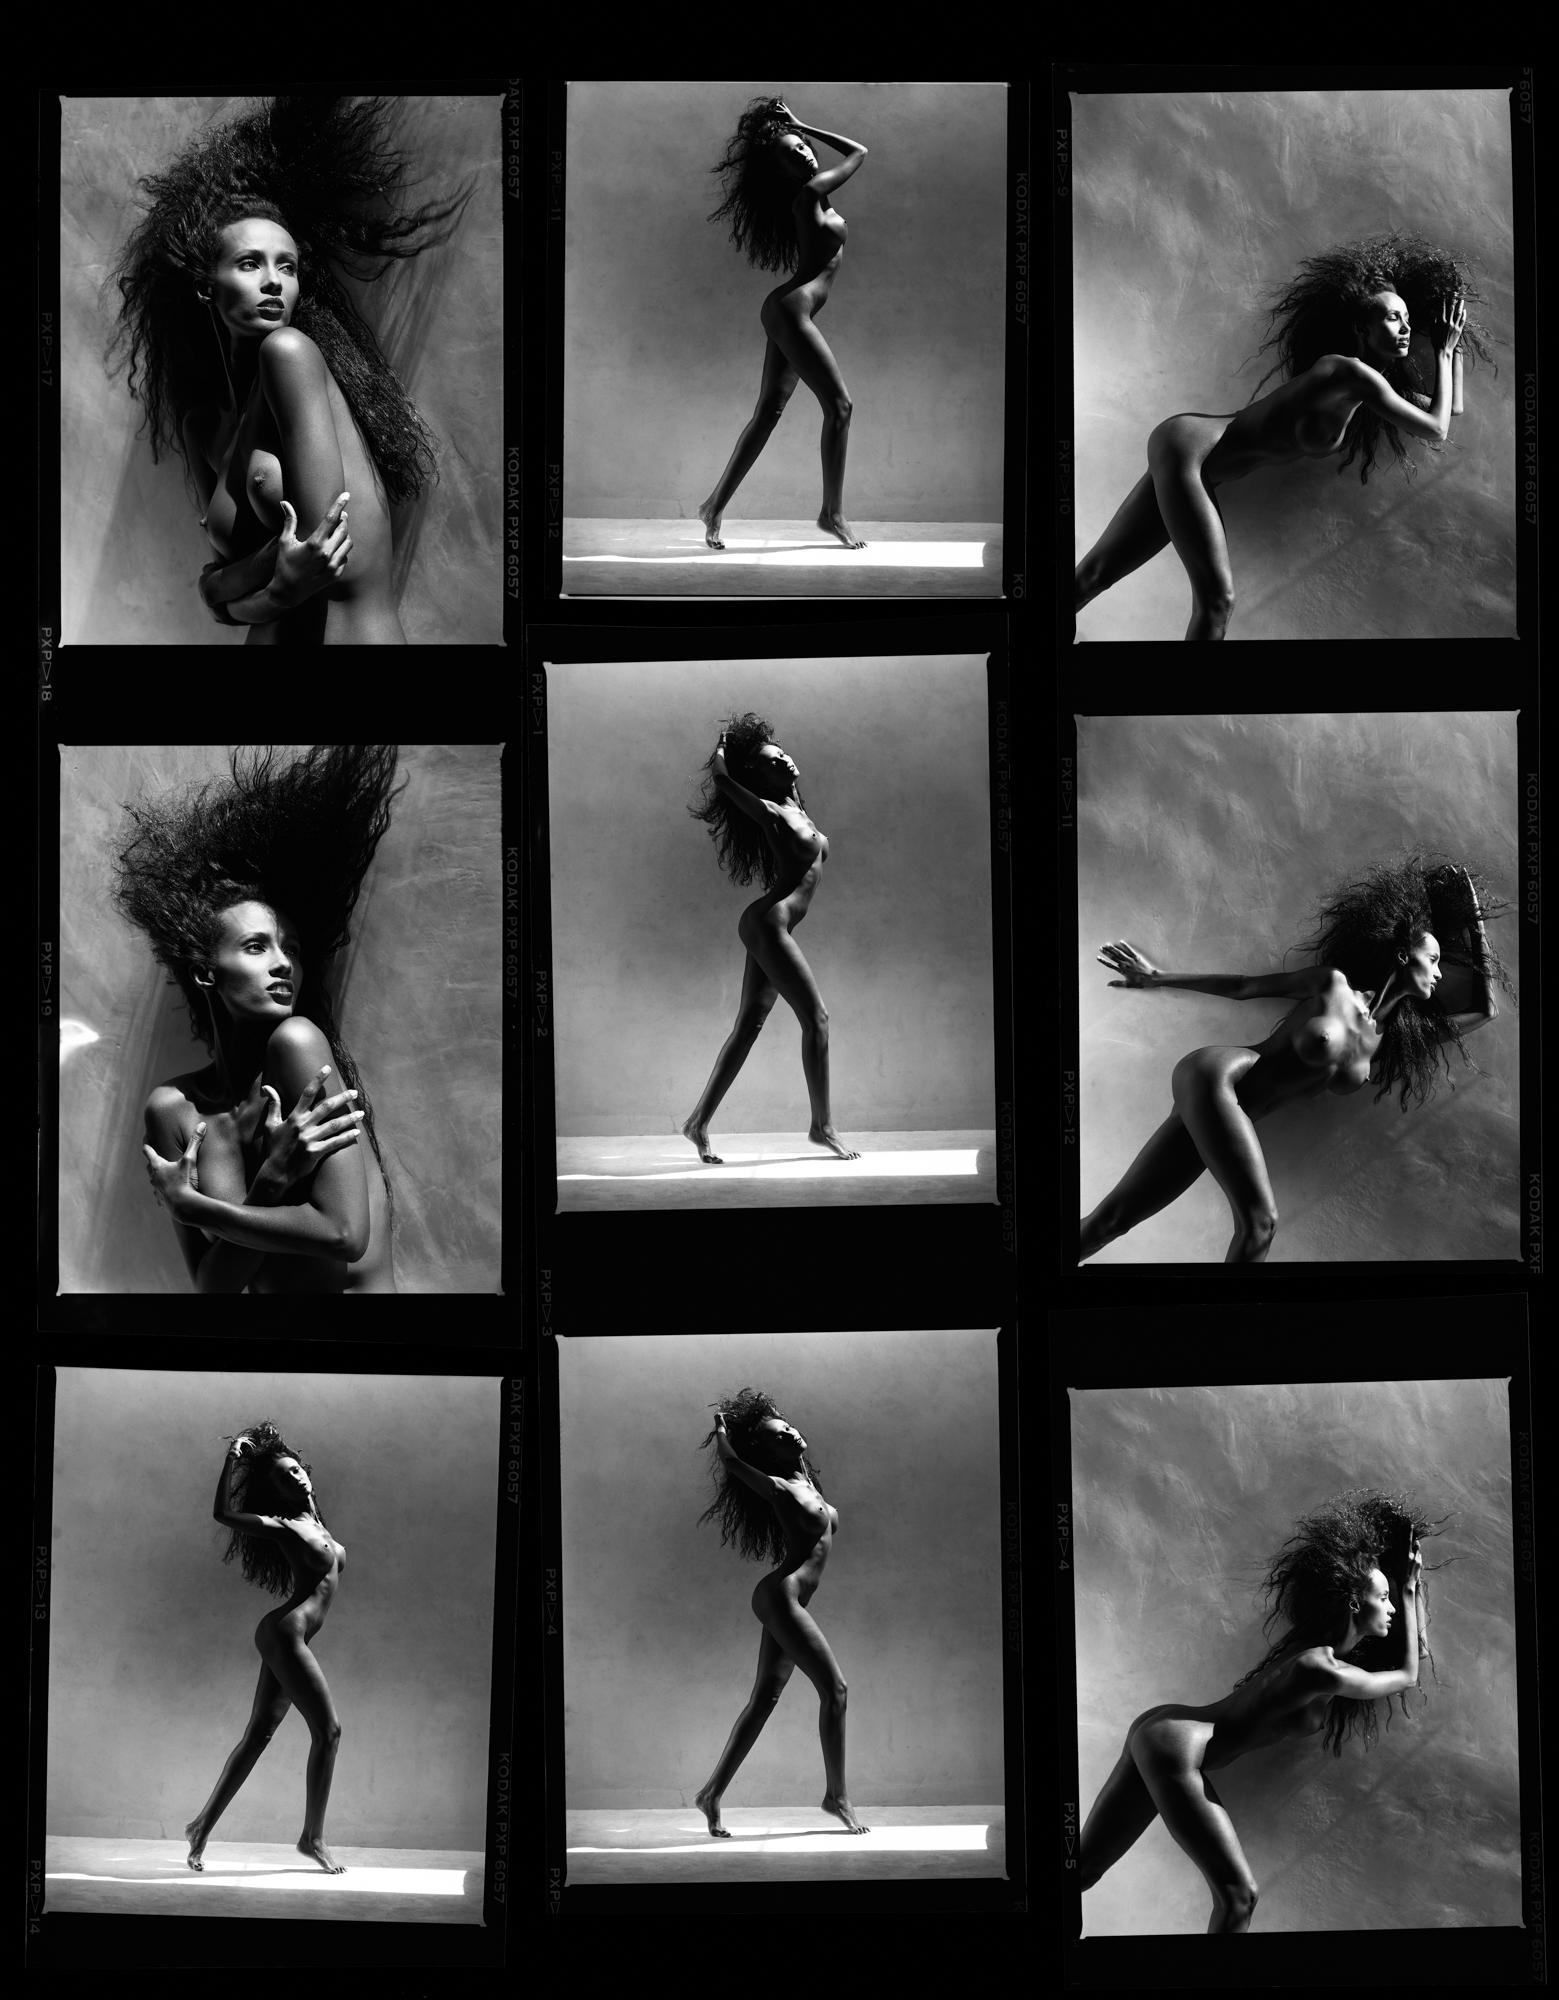 Greg Gorman Black and White Photograph - Iman Contact sheet, 21st Century, Contemporary, Celebrity, Photography